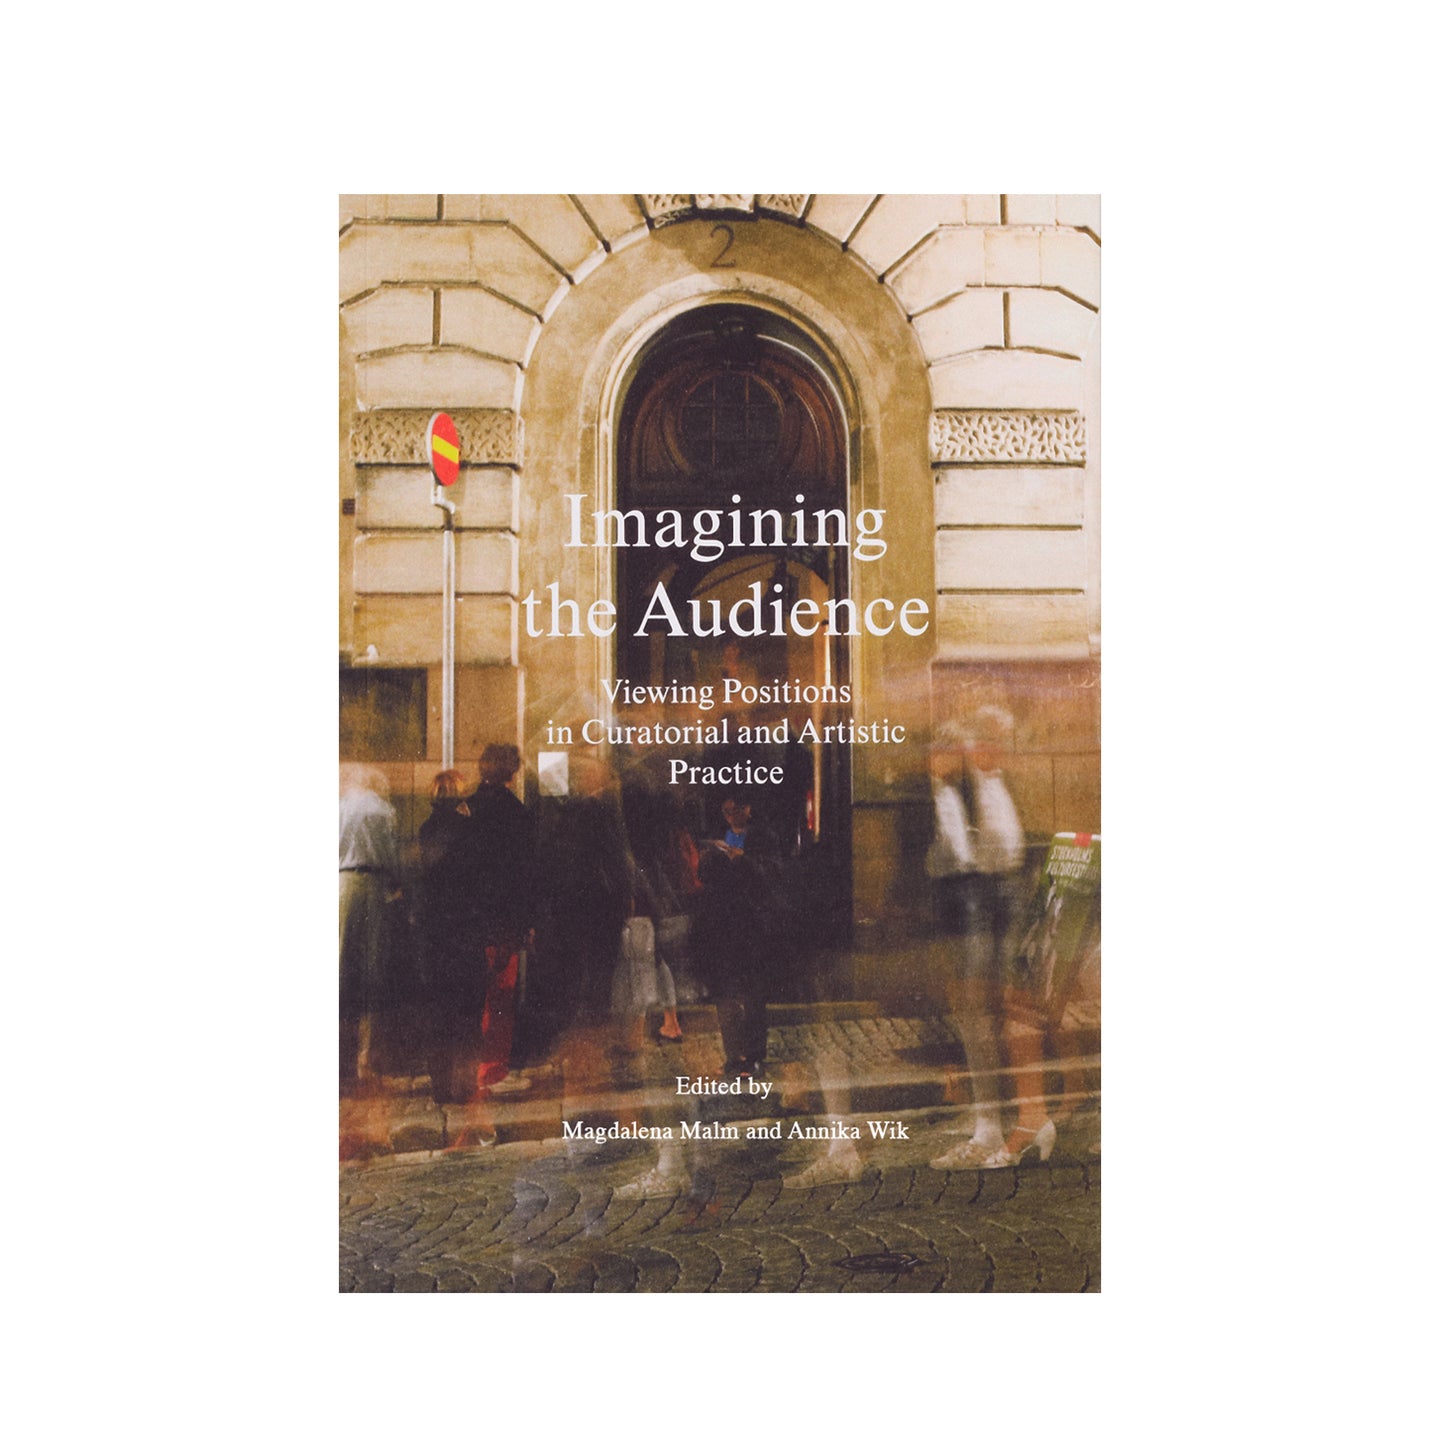 EBOOK: IMAGINING THE AUDIENCE: VIEWING POSITIONS IN CURATORIAL AND ARTISTIC PRACTICE second edition